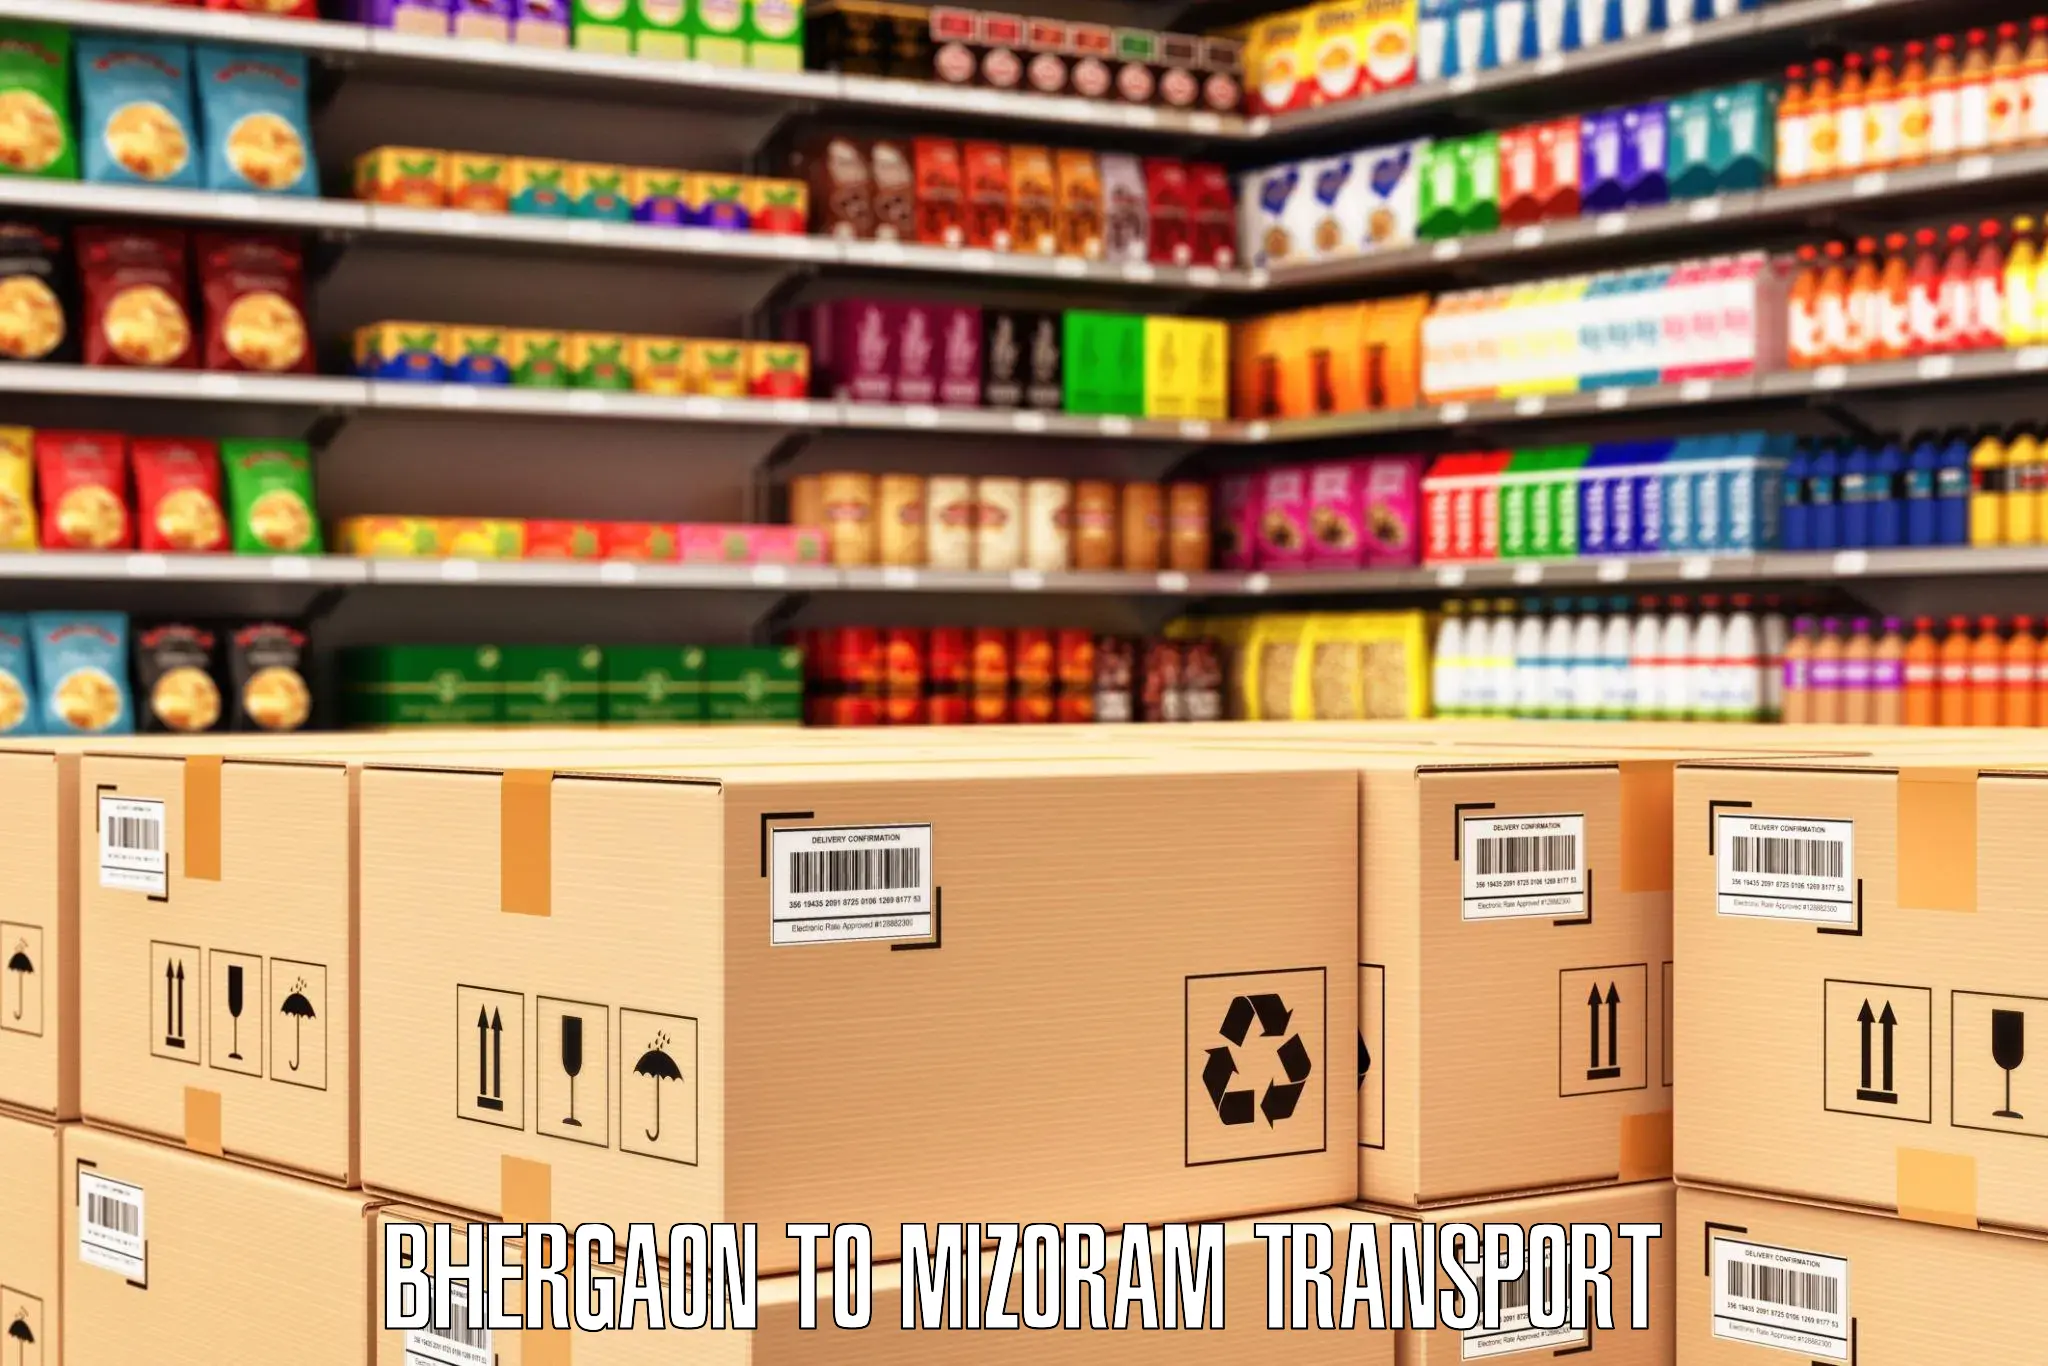 Truck transport companies in India Bhergaon to Darlawn